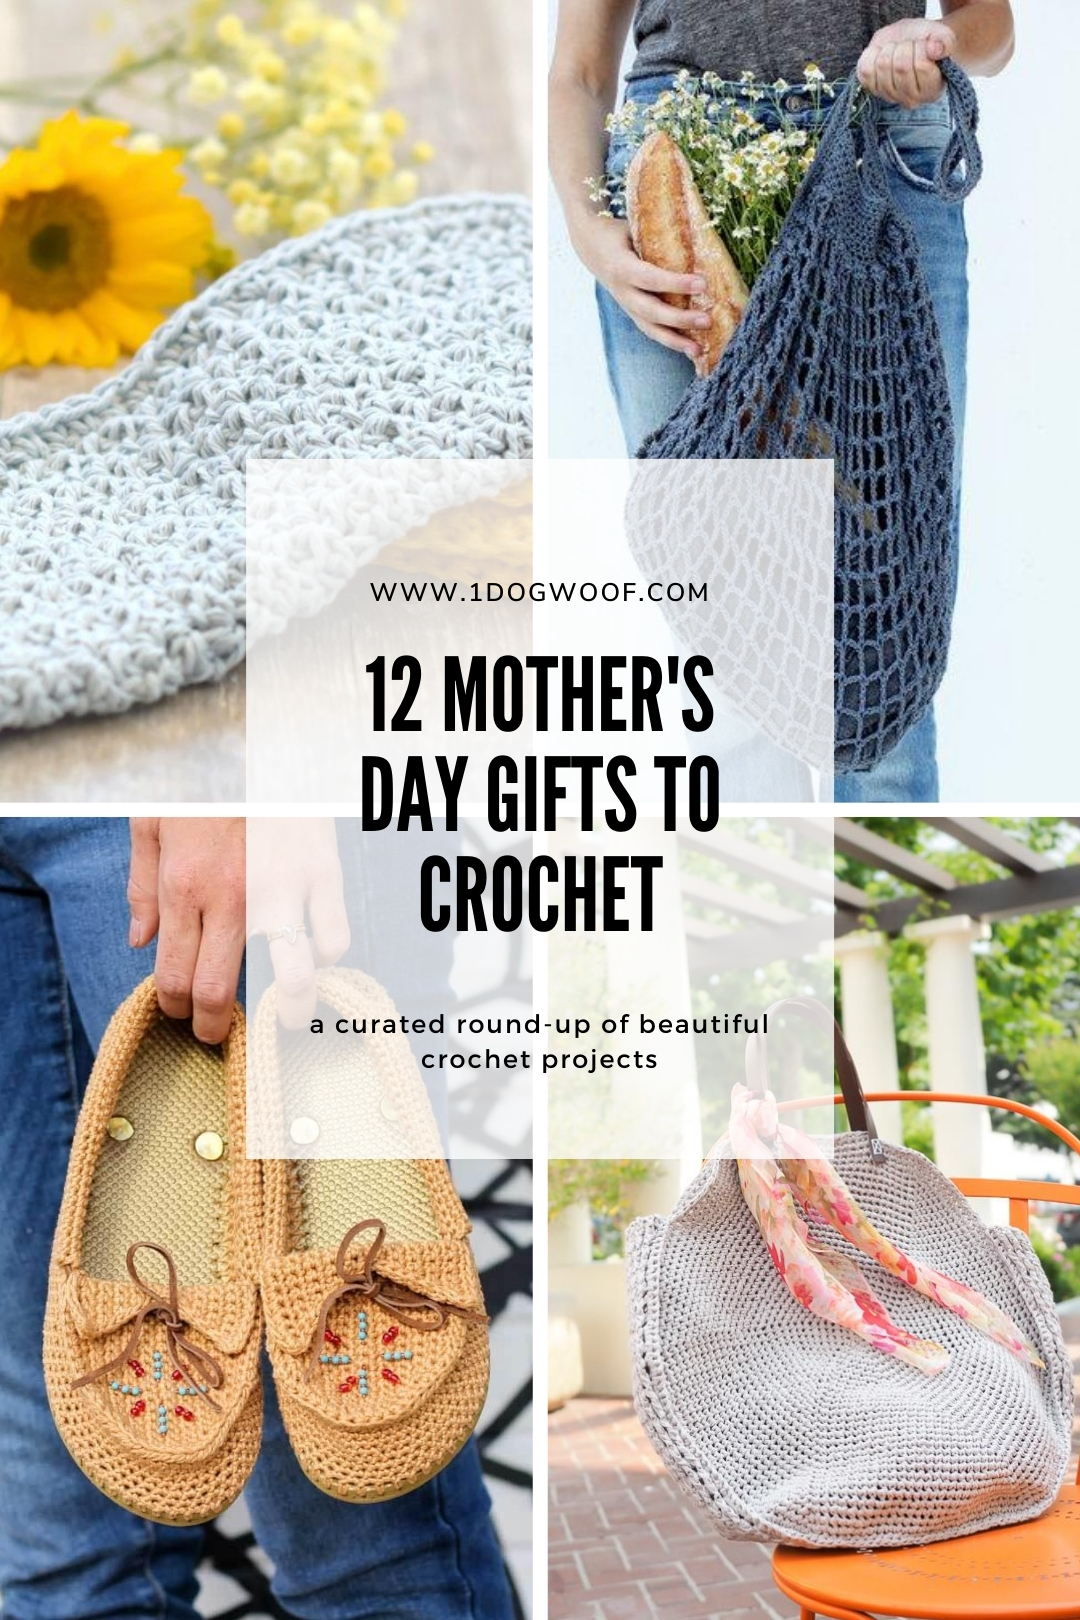 12 Mother’s Day Crochet Gifts I’d Like to Get